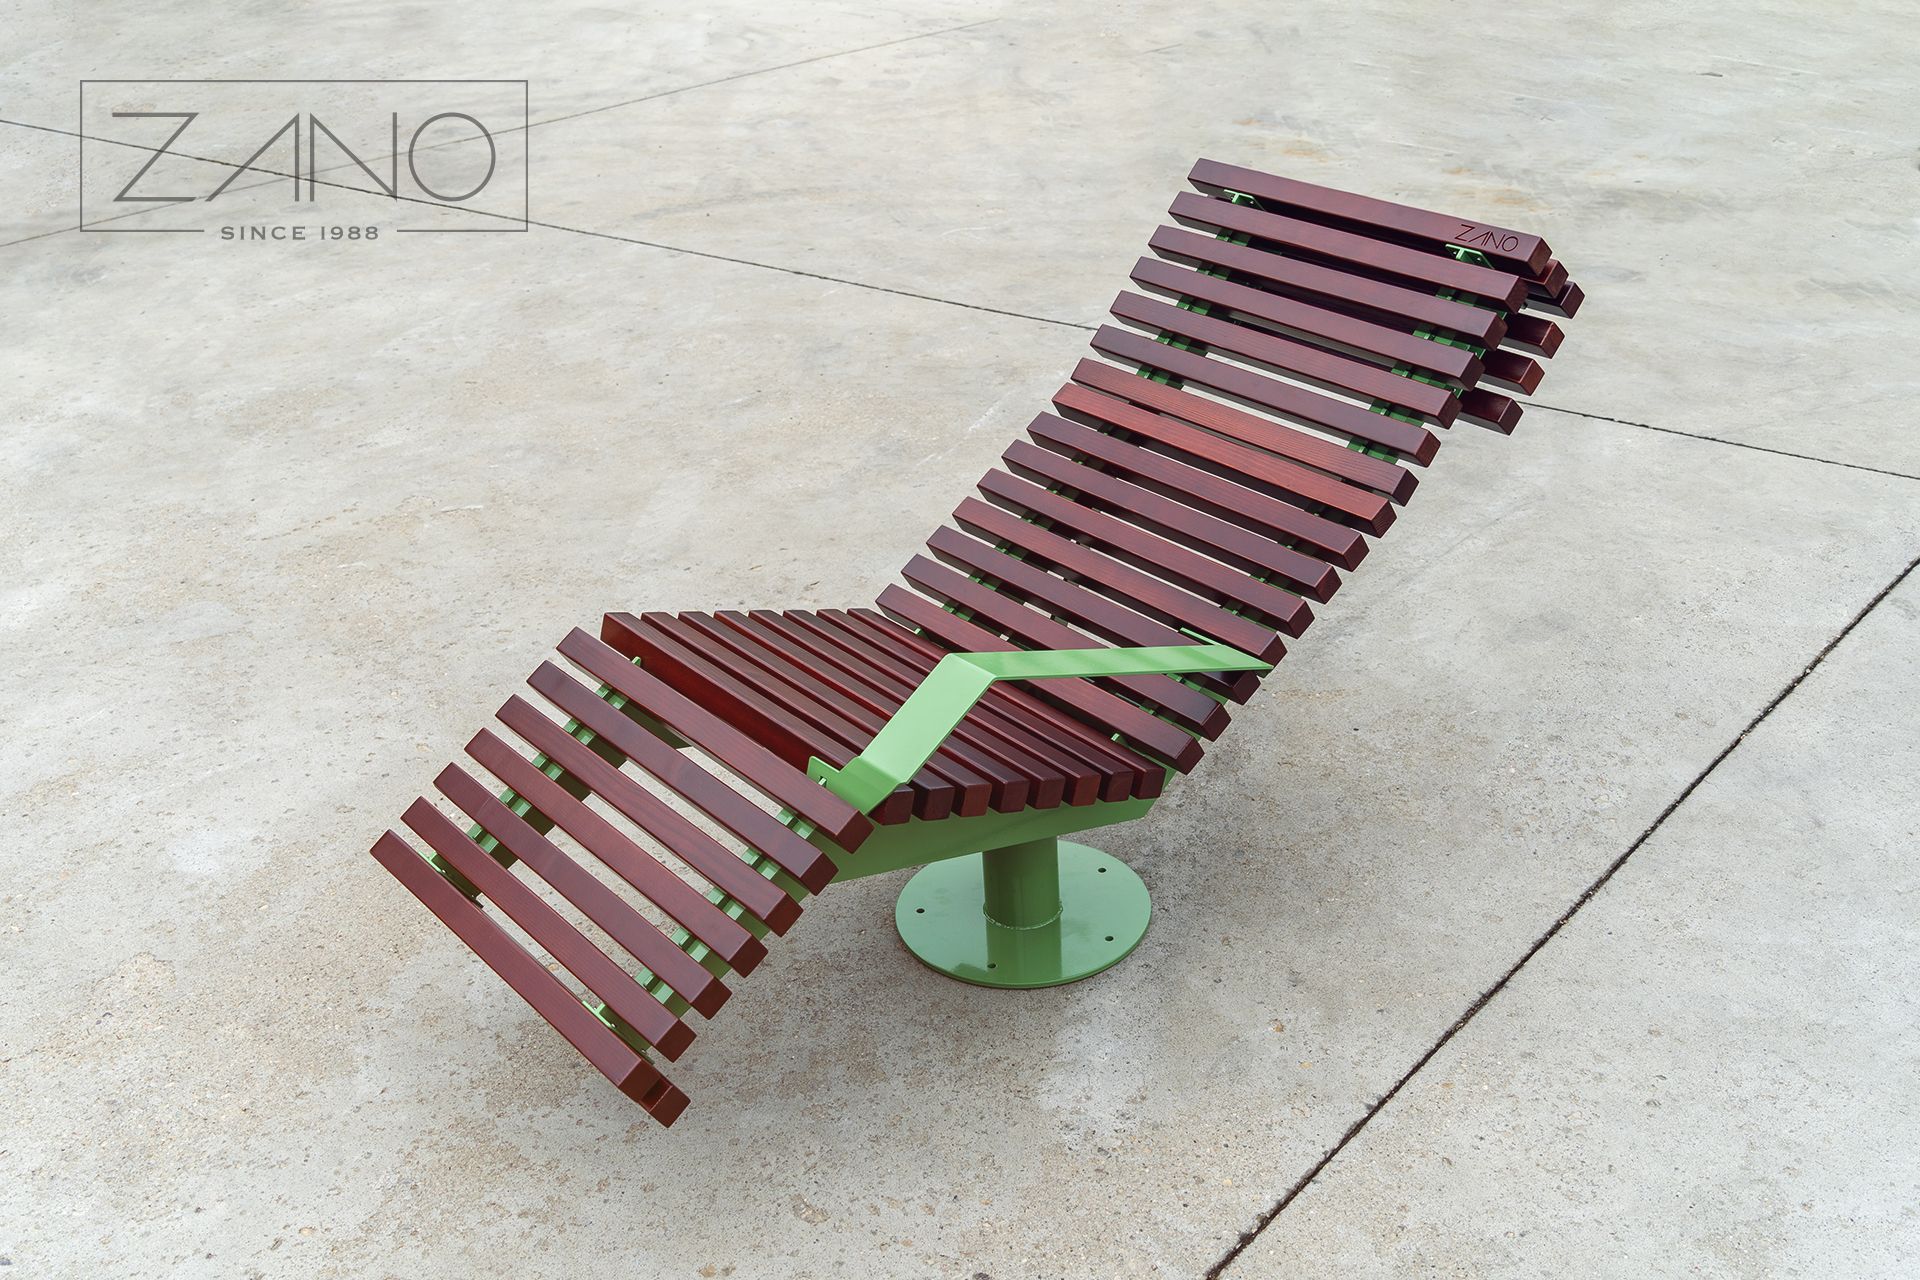 Park seats in steel and wood